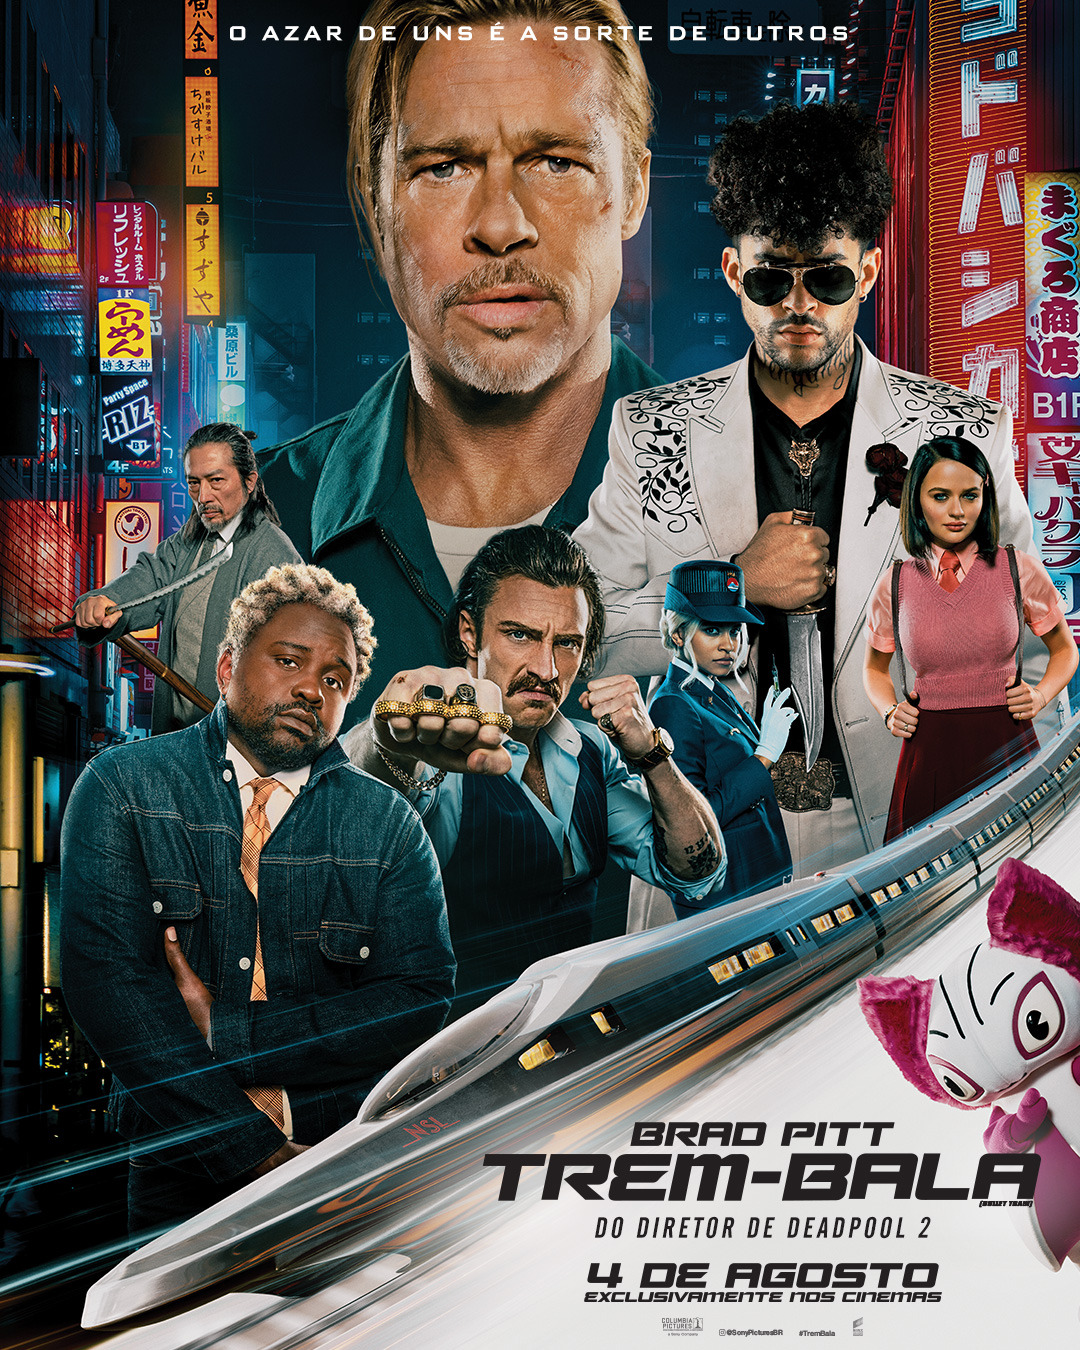 Bullet Train Movie Poster ( of 21)